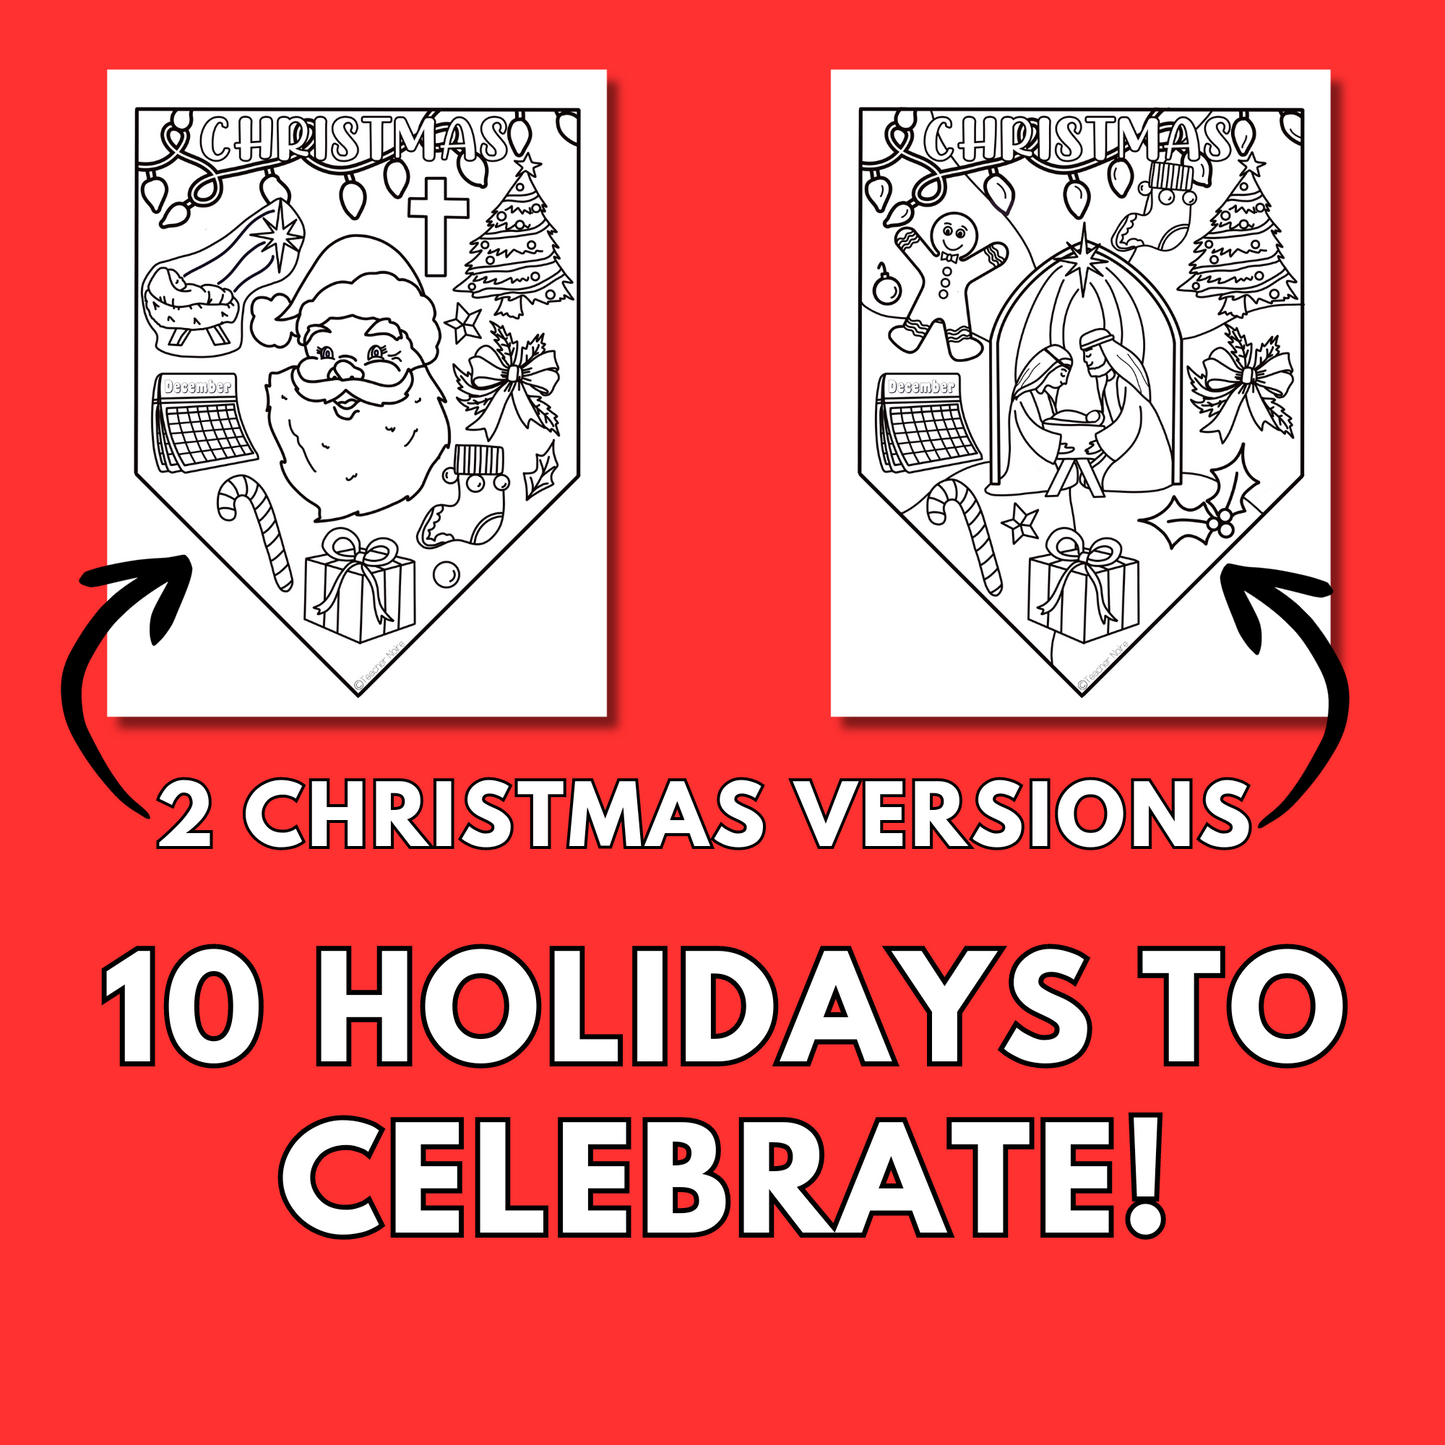 Holidays Around the World Coloring Pages